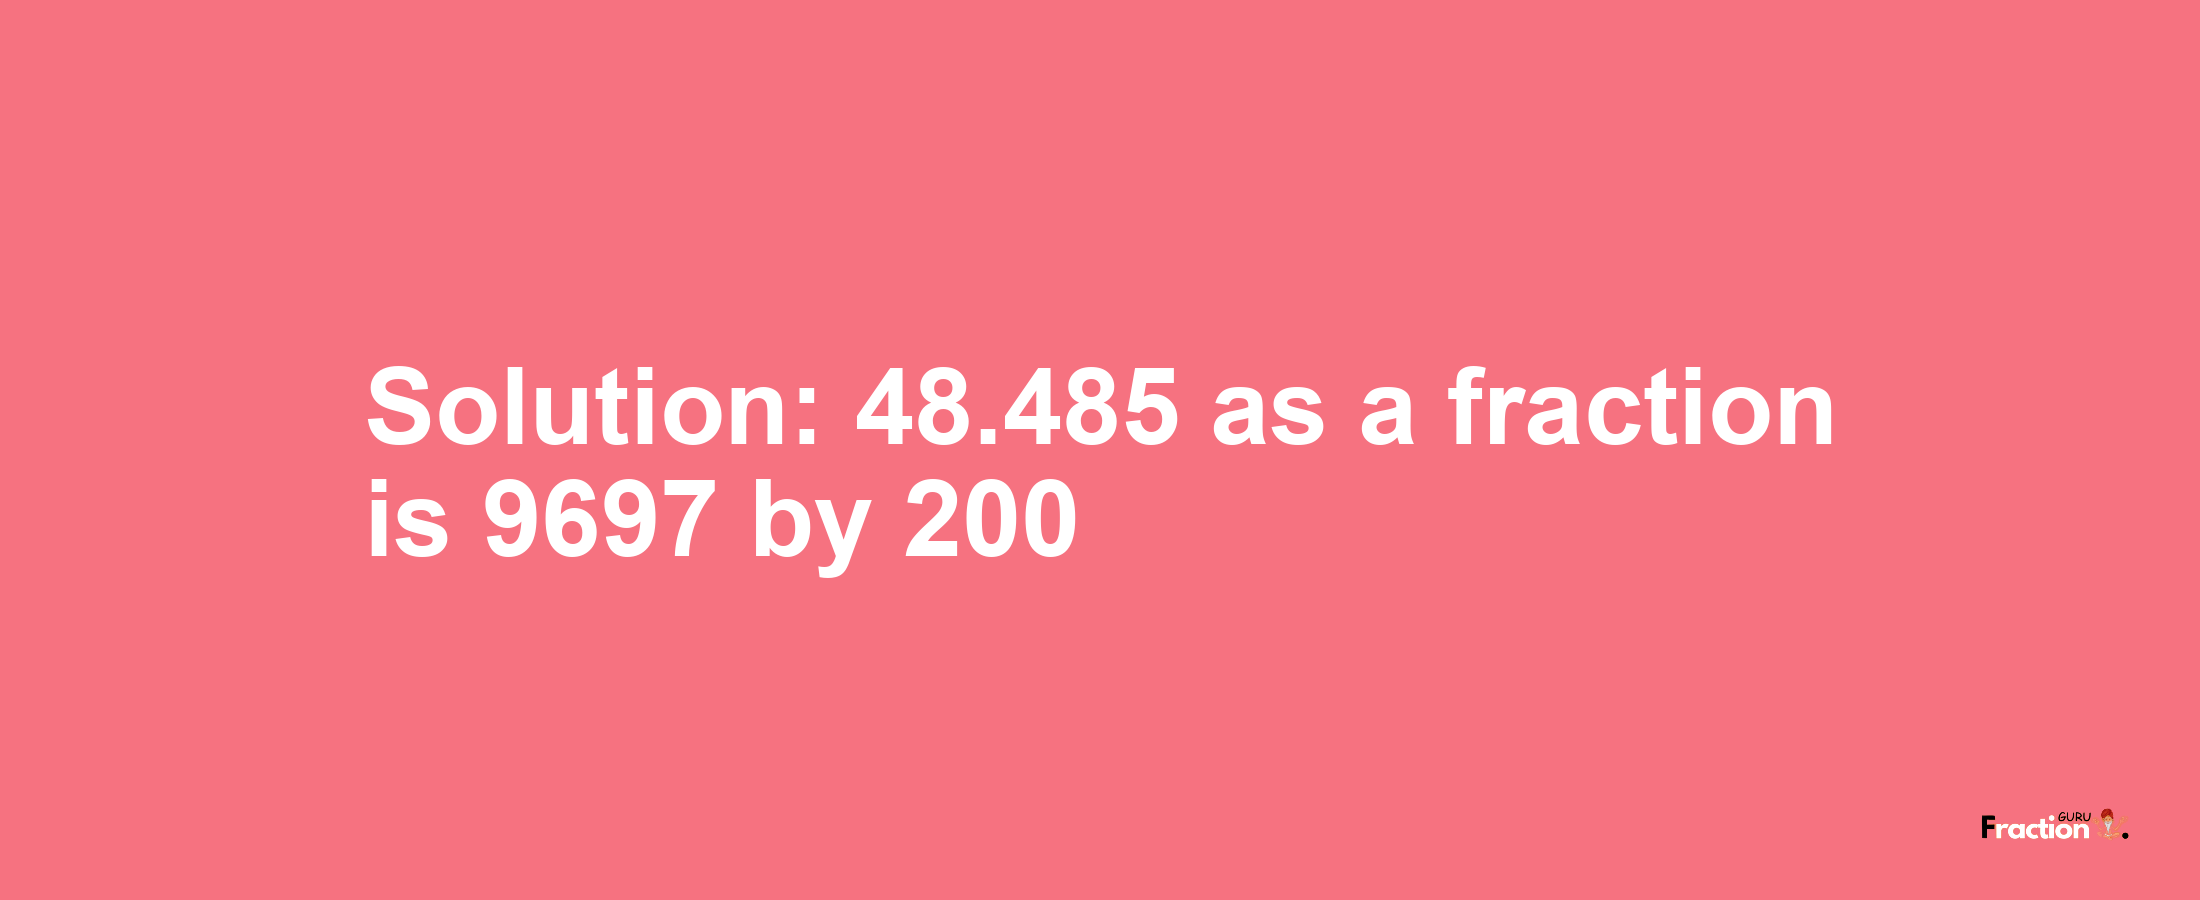 Solution:48.485 as a fraction is 9697/200